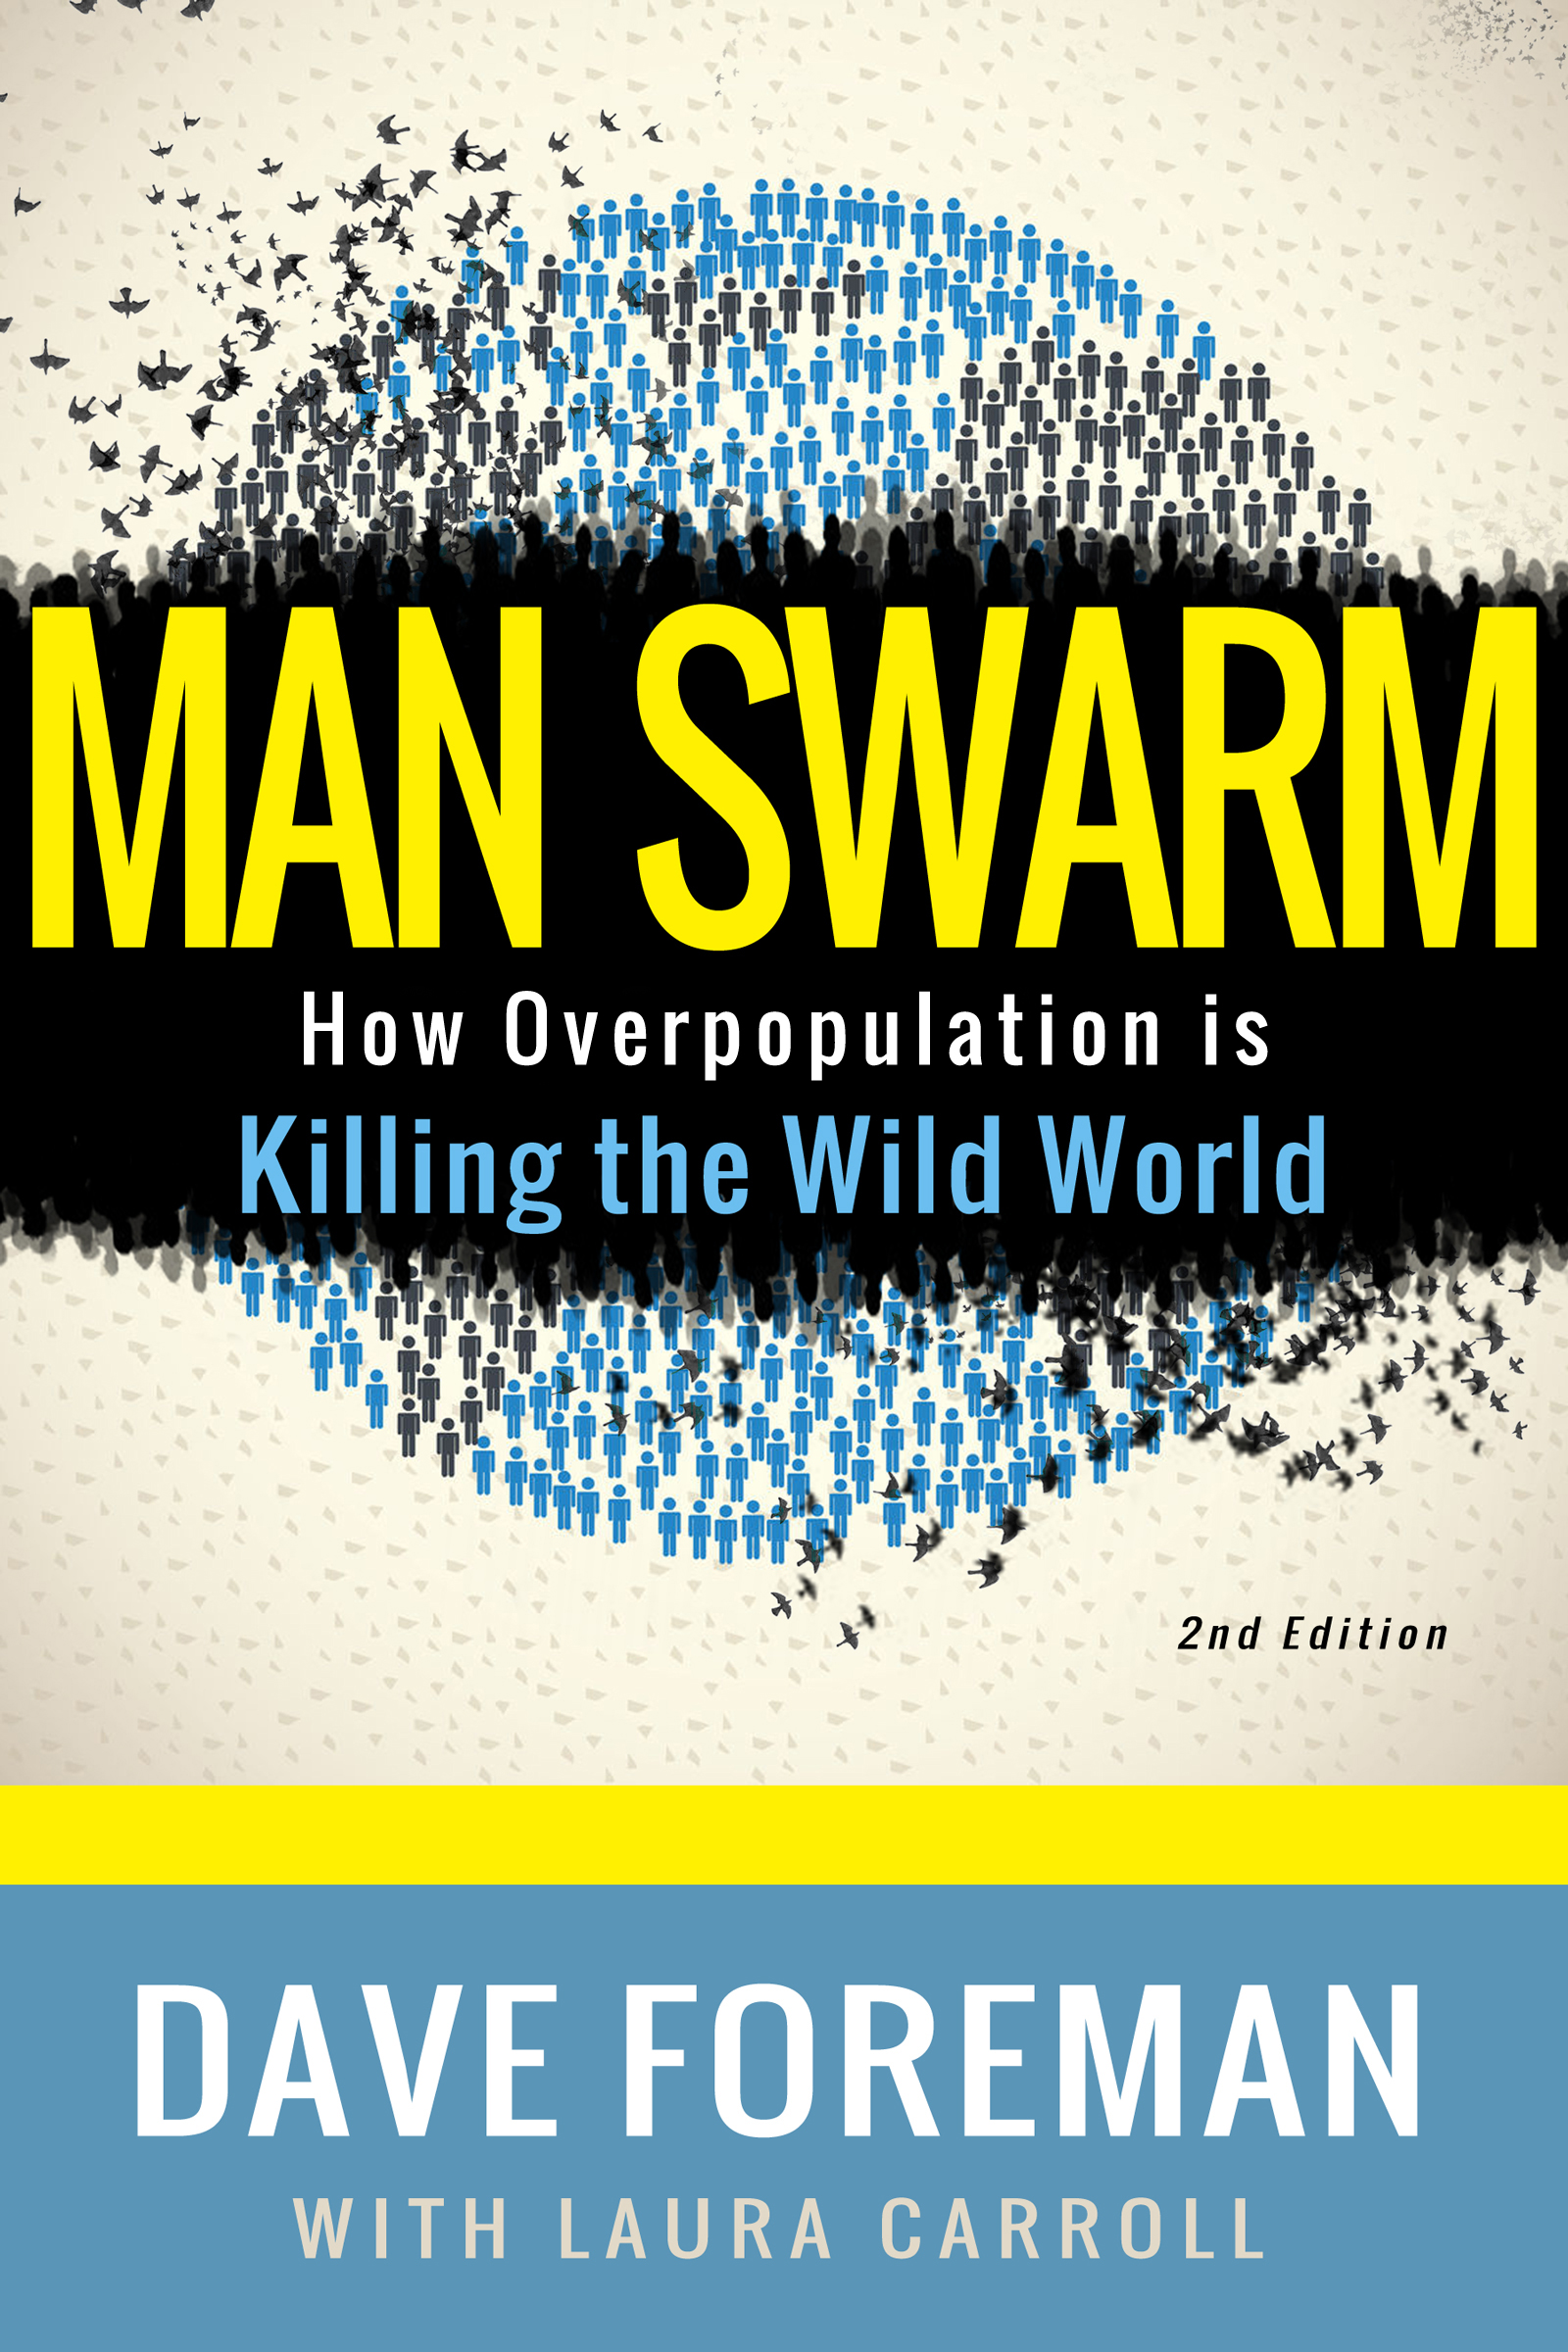 Announcing the Release of my Latest Book! Man Swarm: How Overpopulation is Killing the Wild World